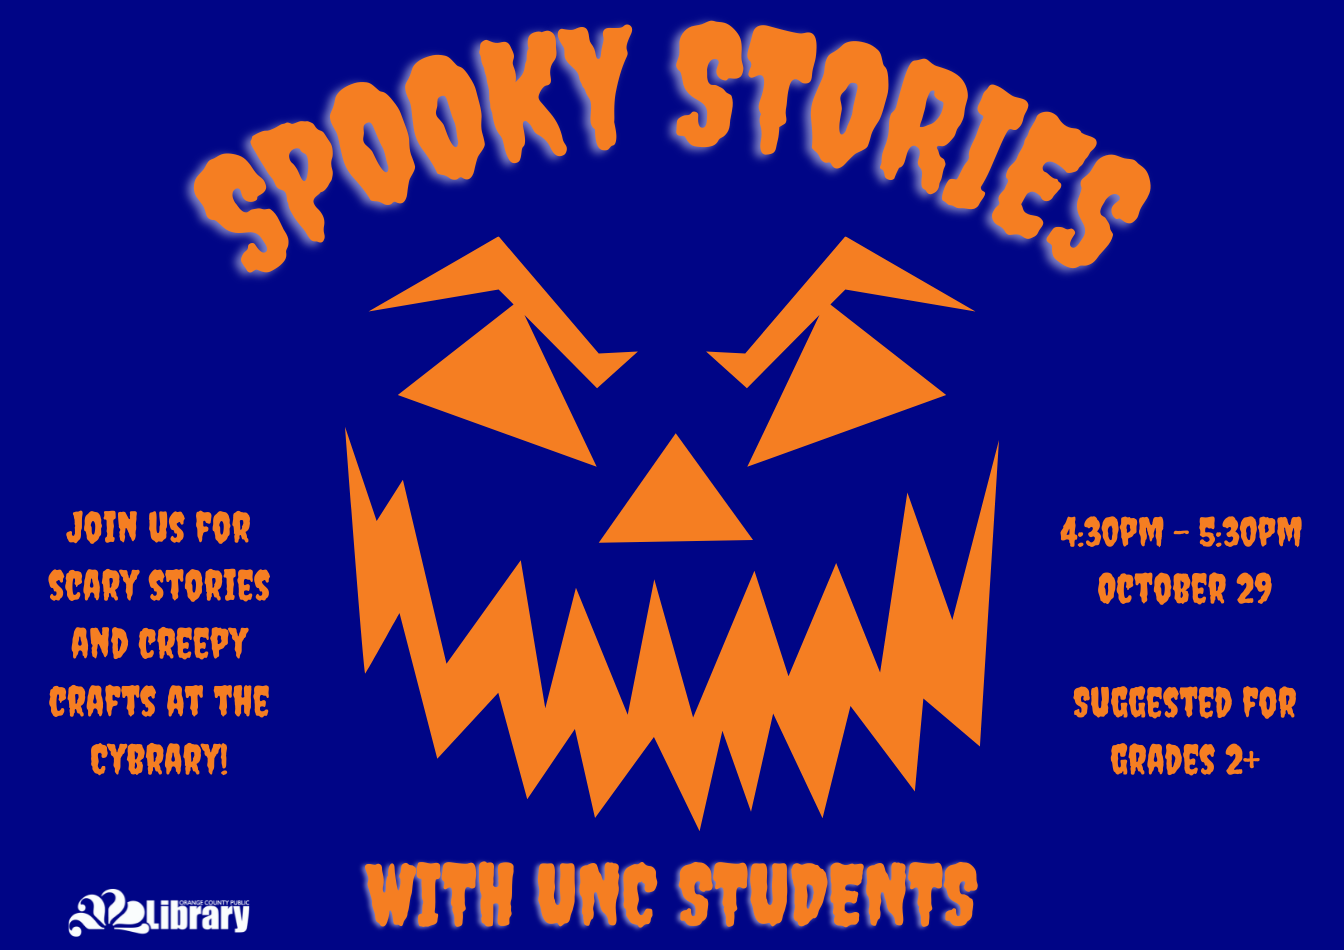 A dark blue flyer with an orange jack-o-lantern face. Text: Spooky stories with UNC students. Join us for scary stories and creepy crafts at the Cybrary! 4:30 pm to 5:30 pm, October 29. Suggested for grades 2 and up.